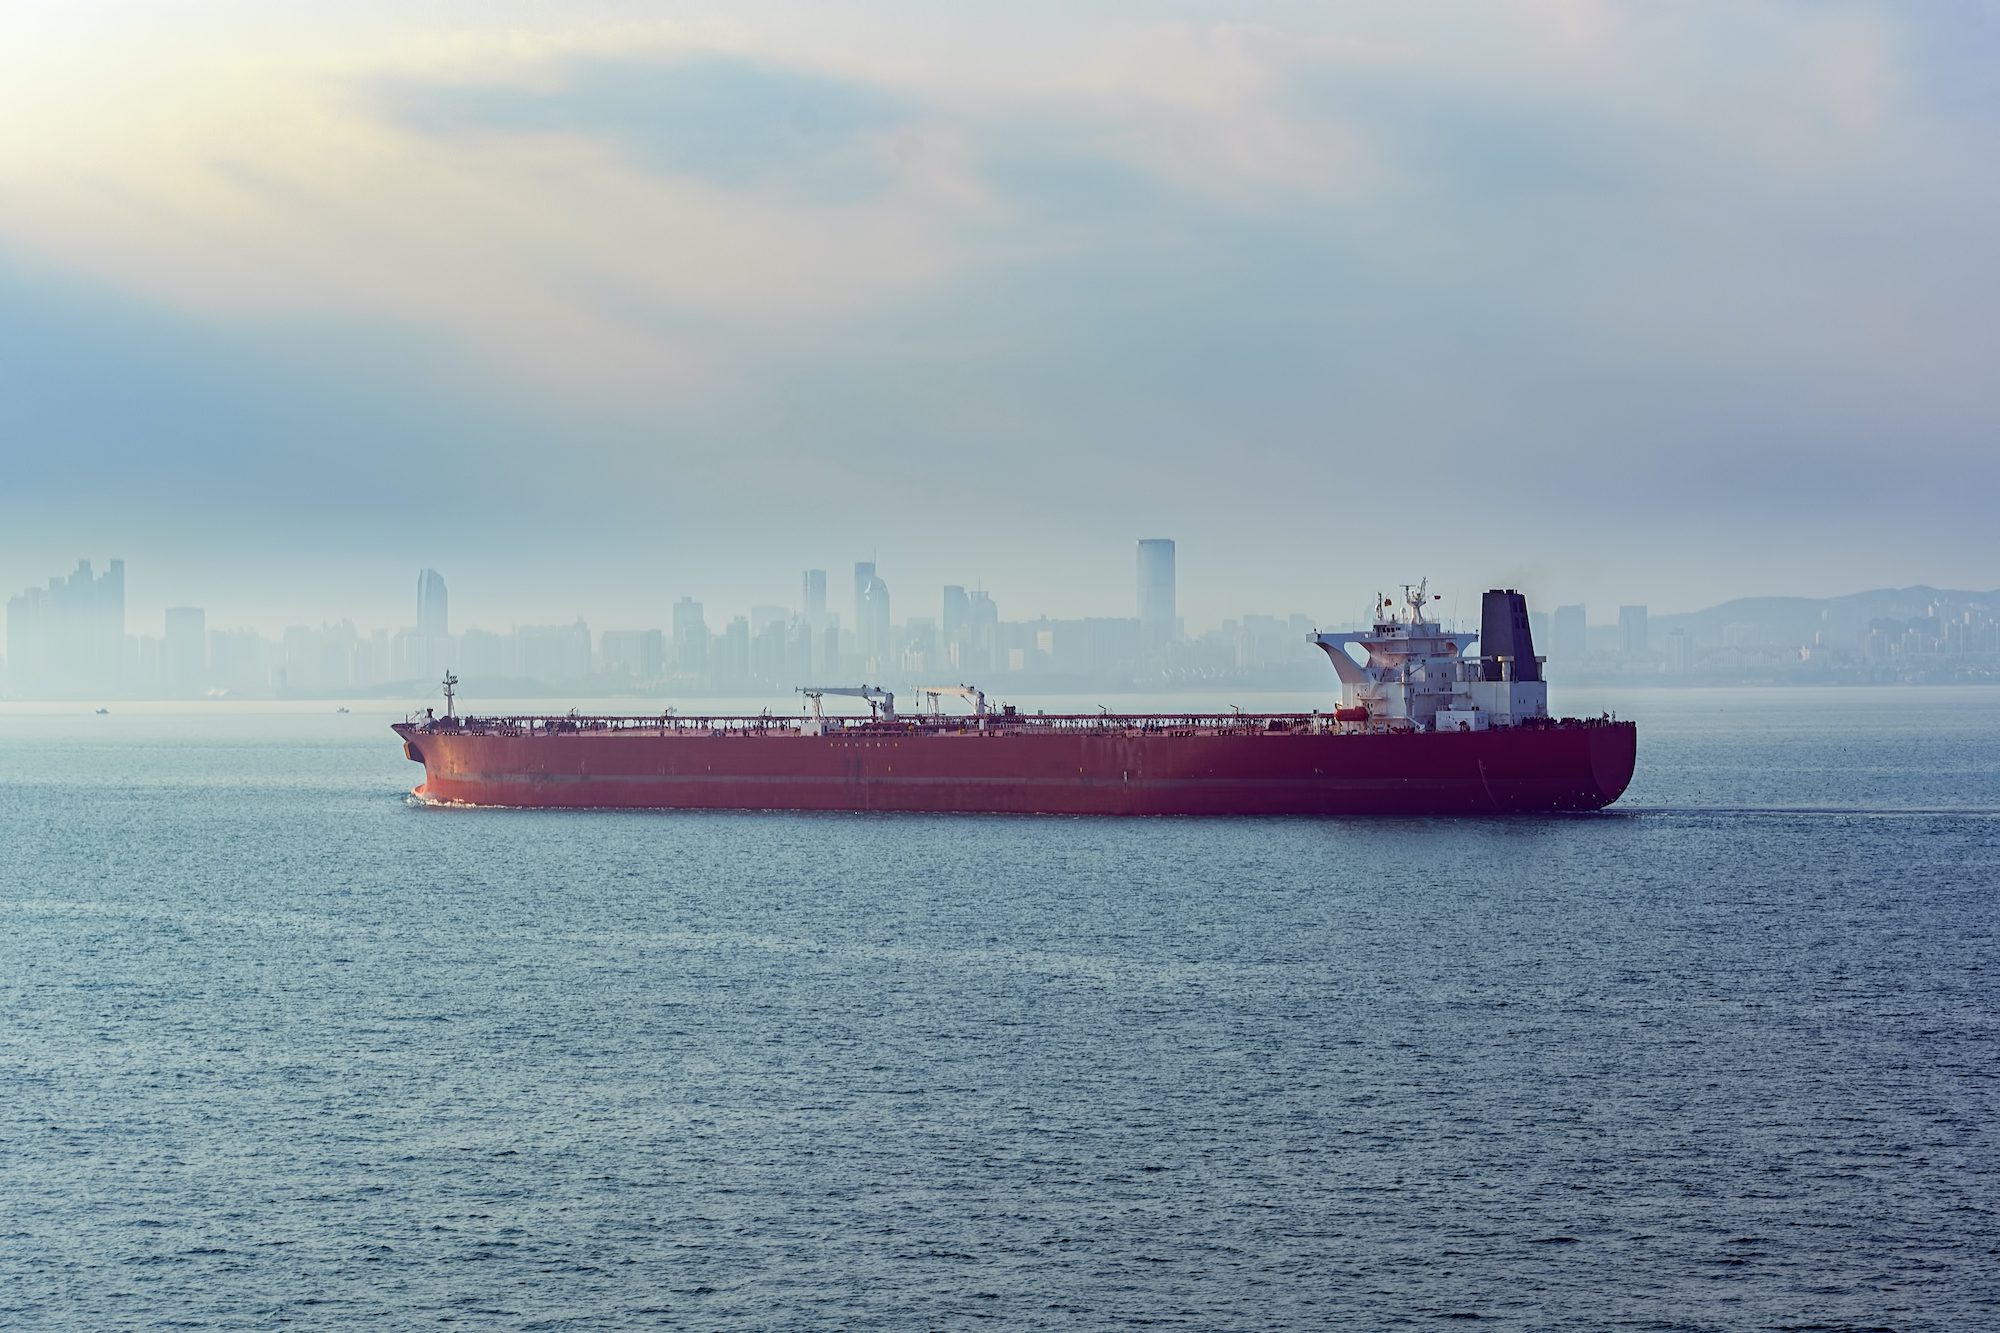 Laden crude oil tanker approaches the port of Qingdao, China in the morning fog. Photo credit: Shutterstock/Igor Grochev